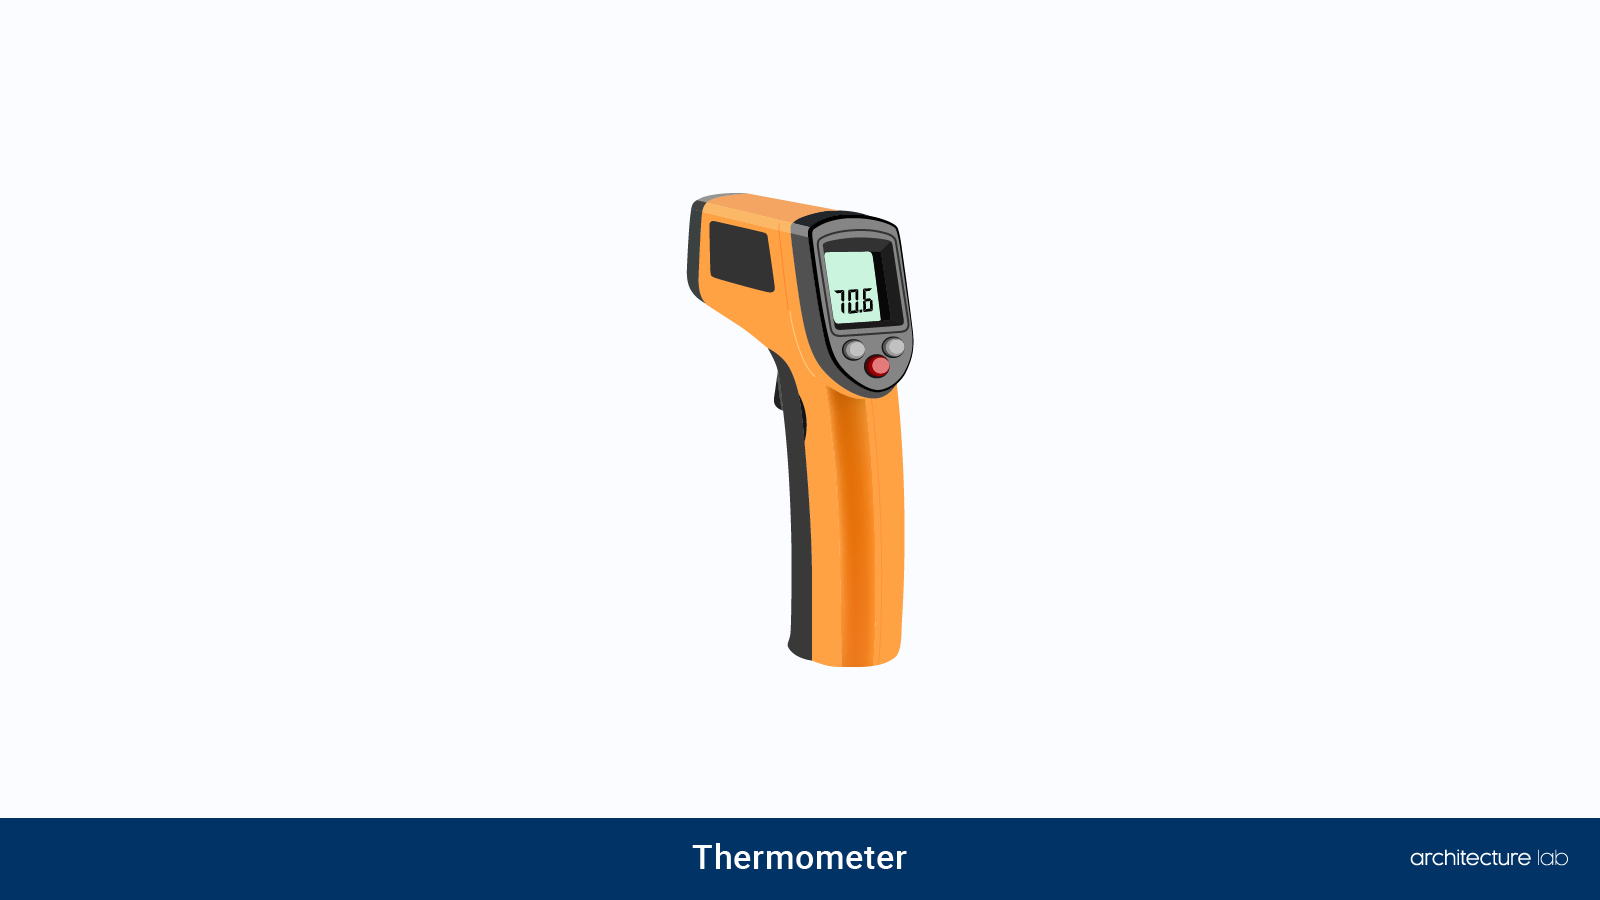 8. Thermometer